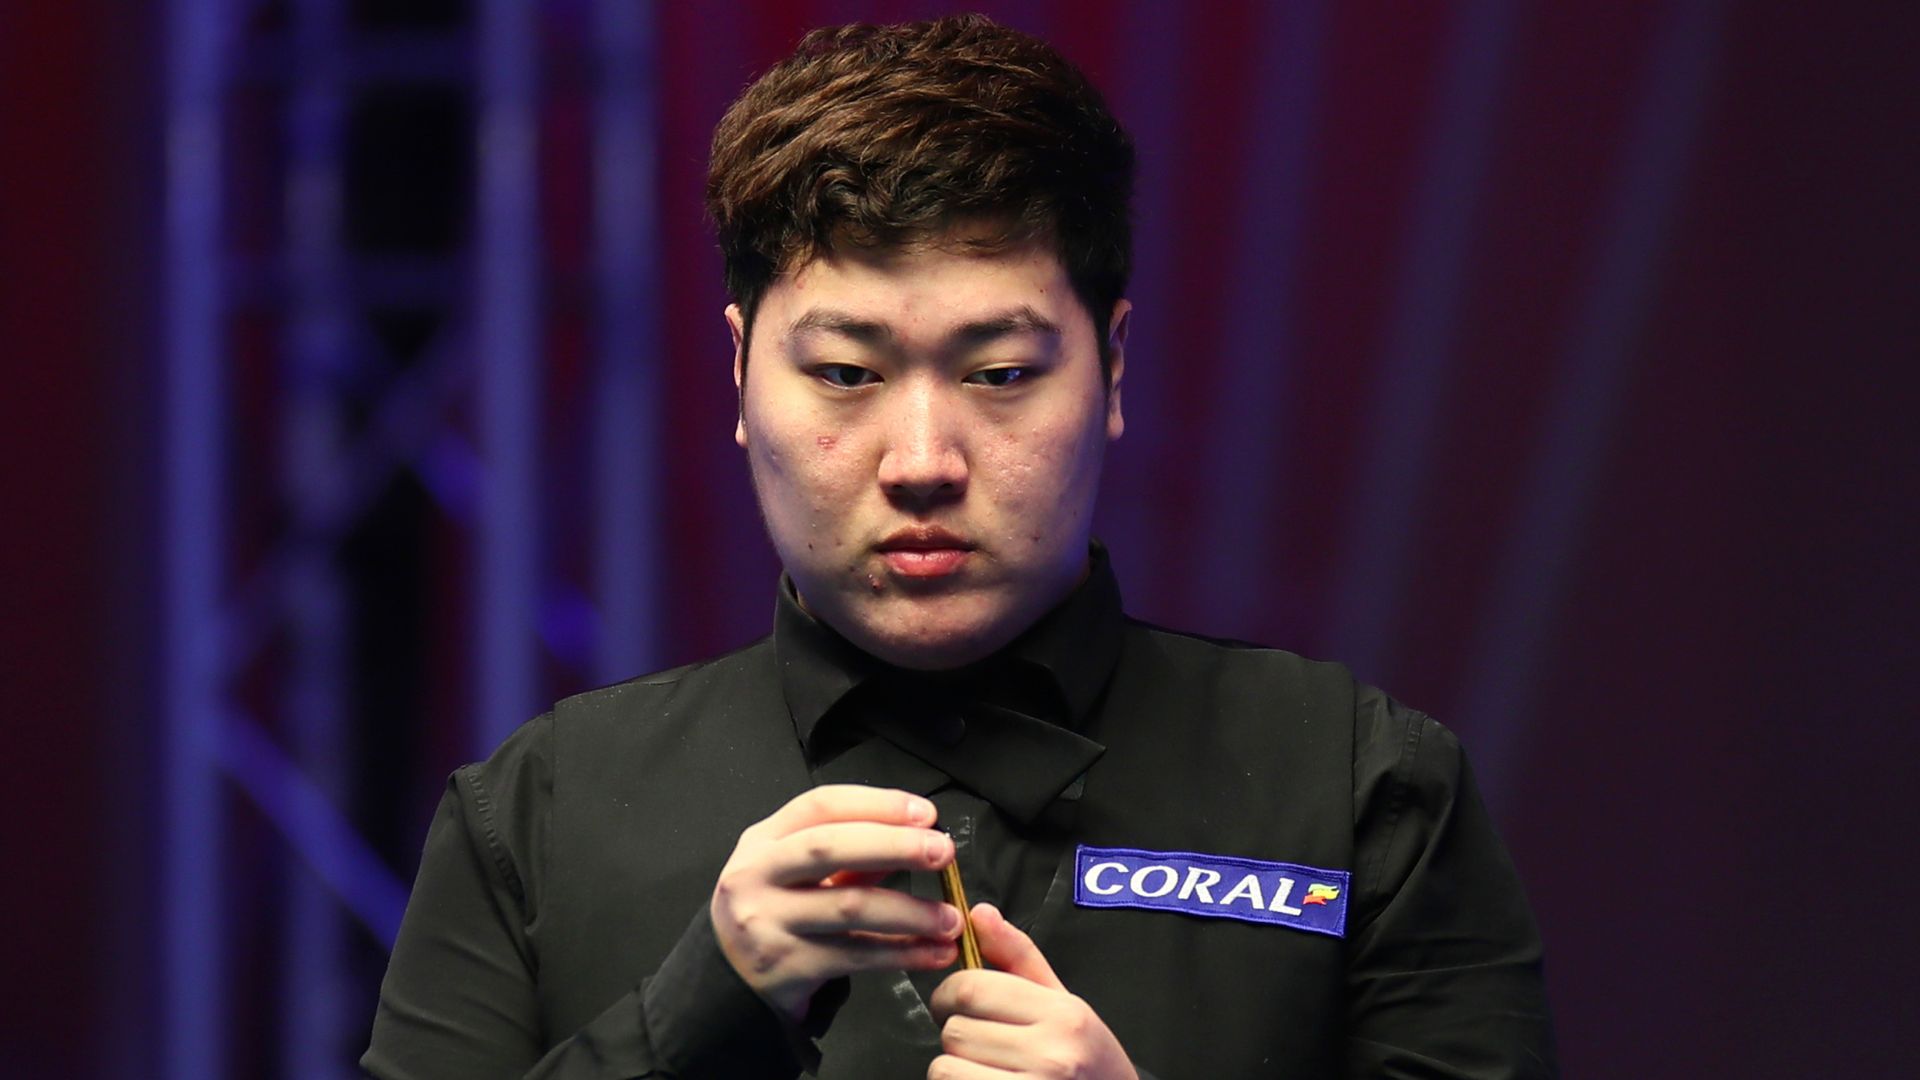 Ten Chinese snooker players face charges related to match-fixing